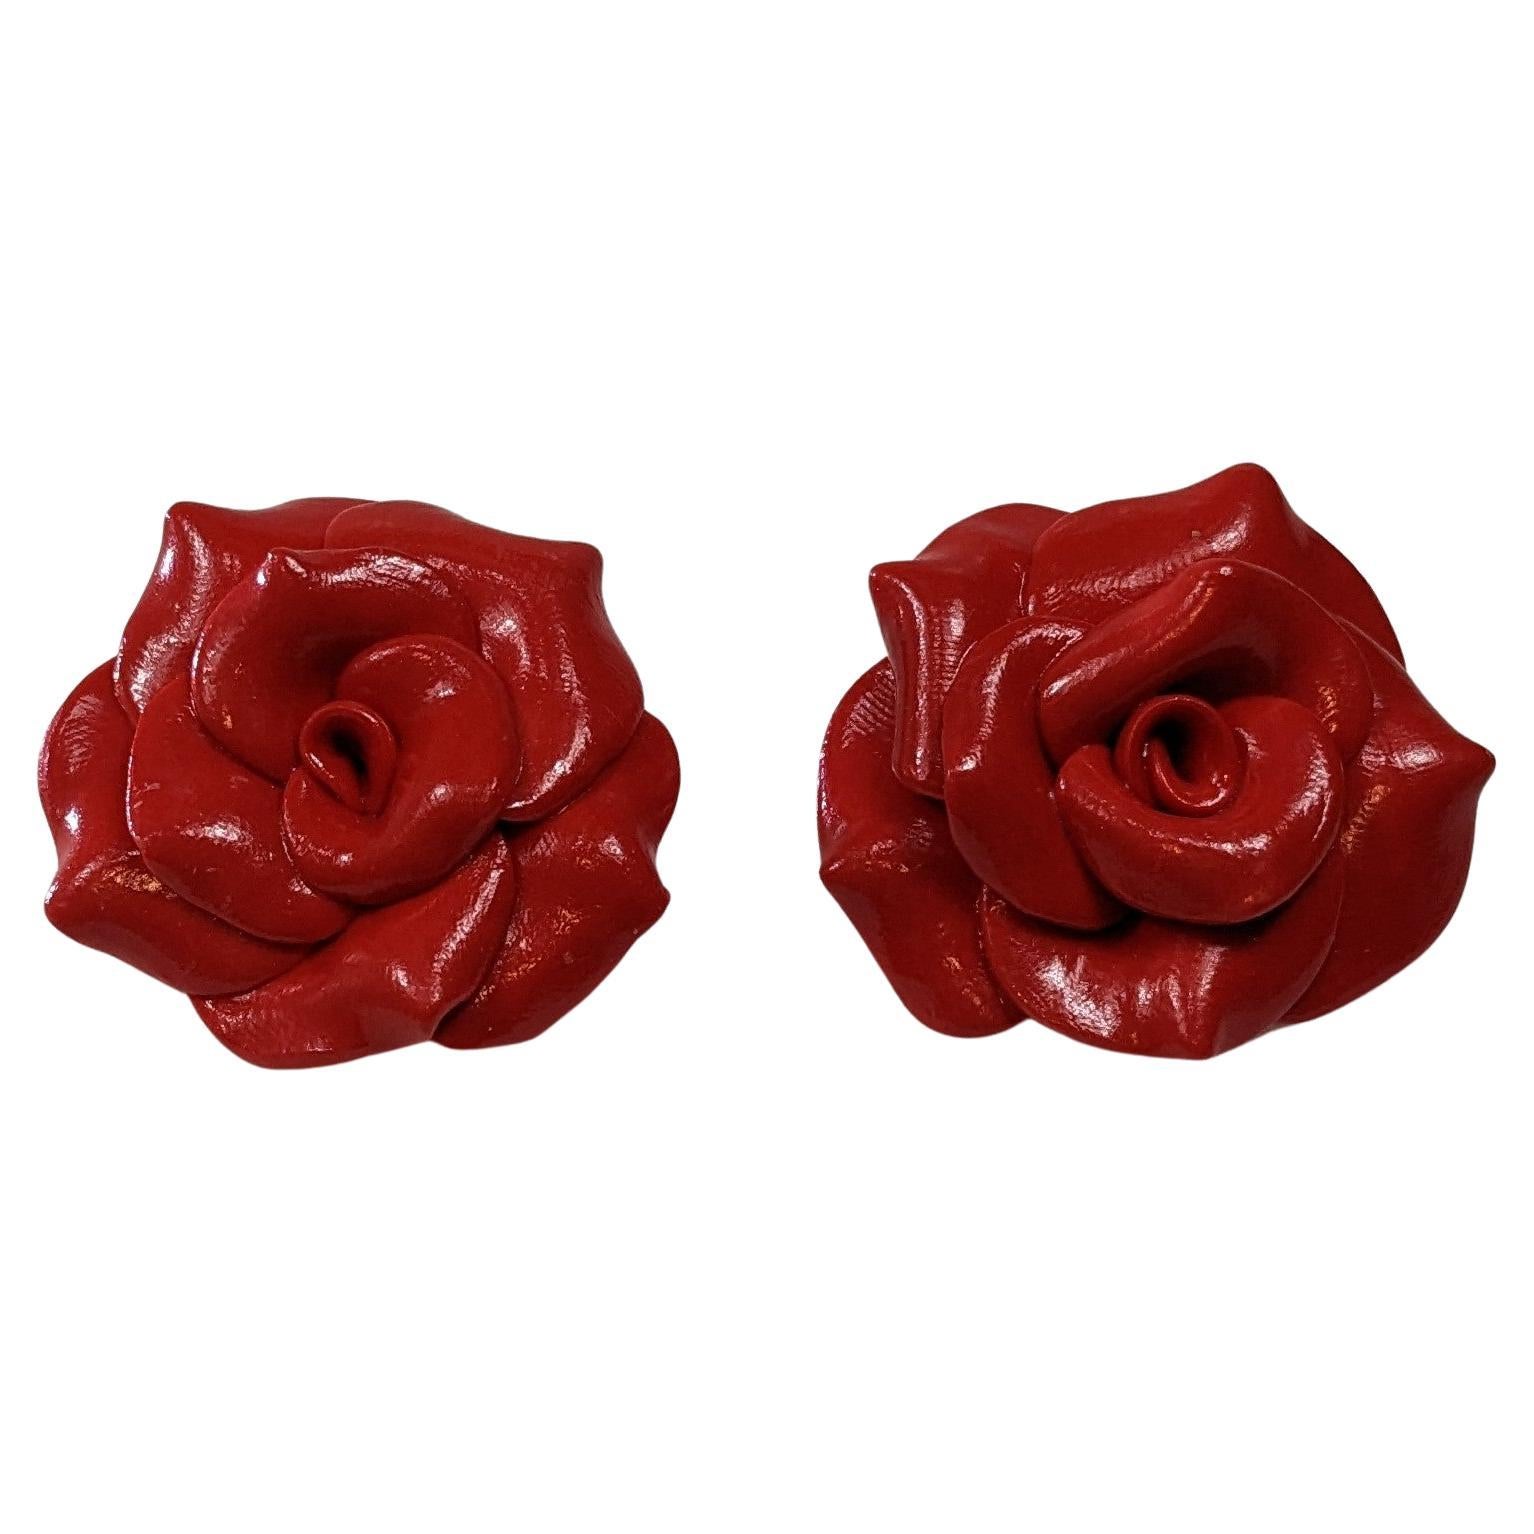  Red Camelia Polymer  Earrings with golplated silver closure For Sale